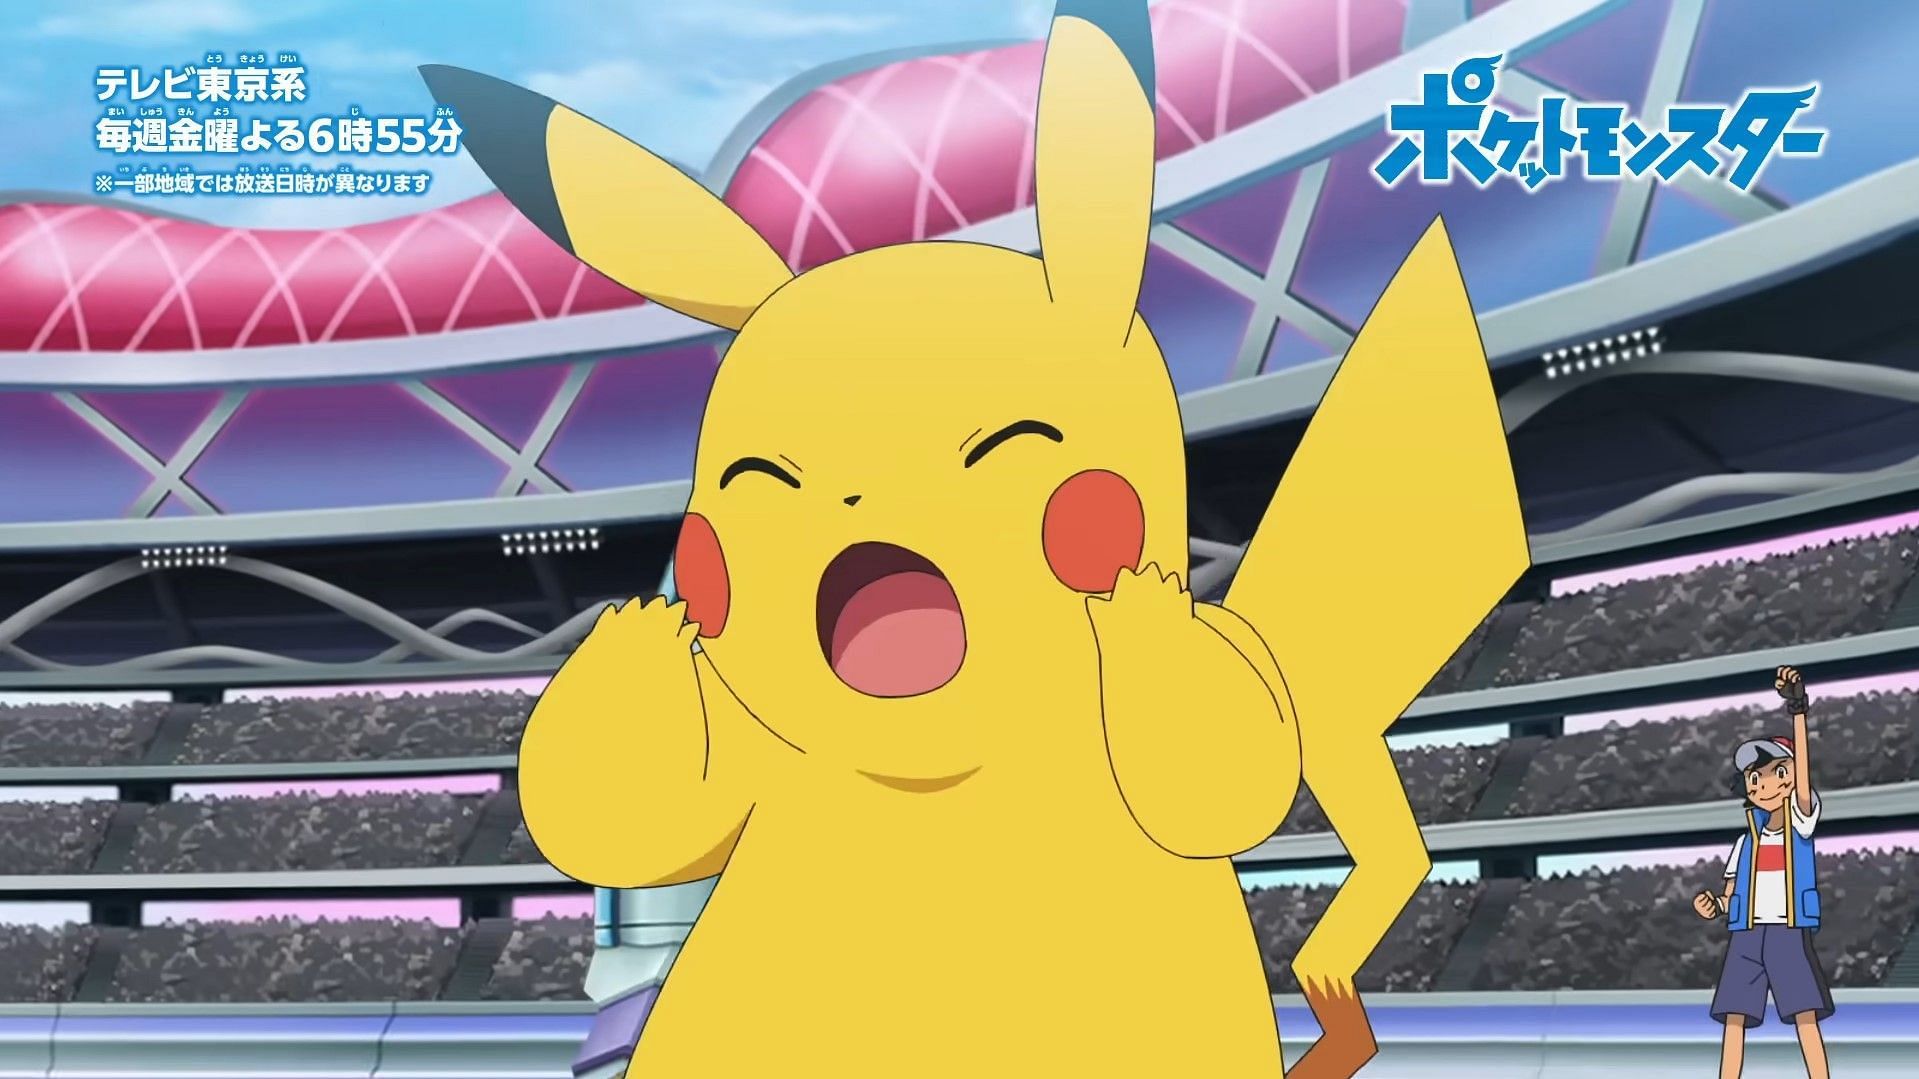 It's going to be a tough bout for Pikachu (Image via OLM, Inc)